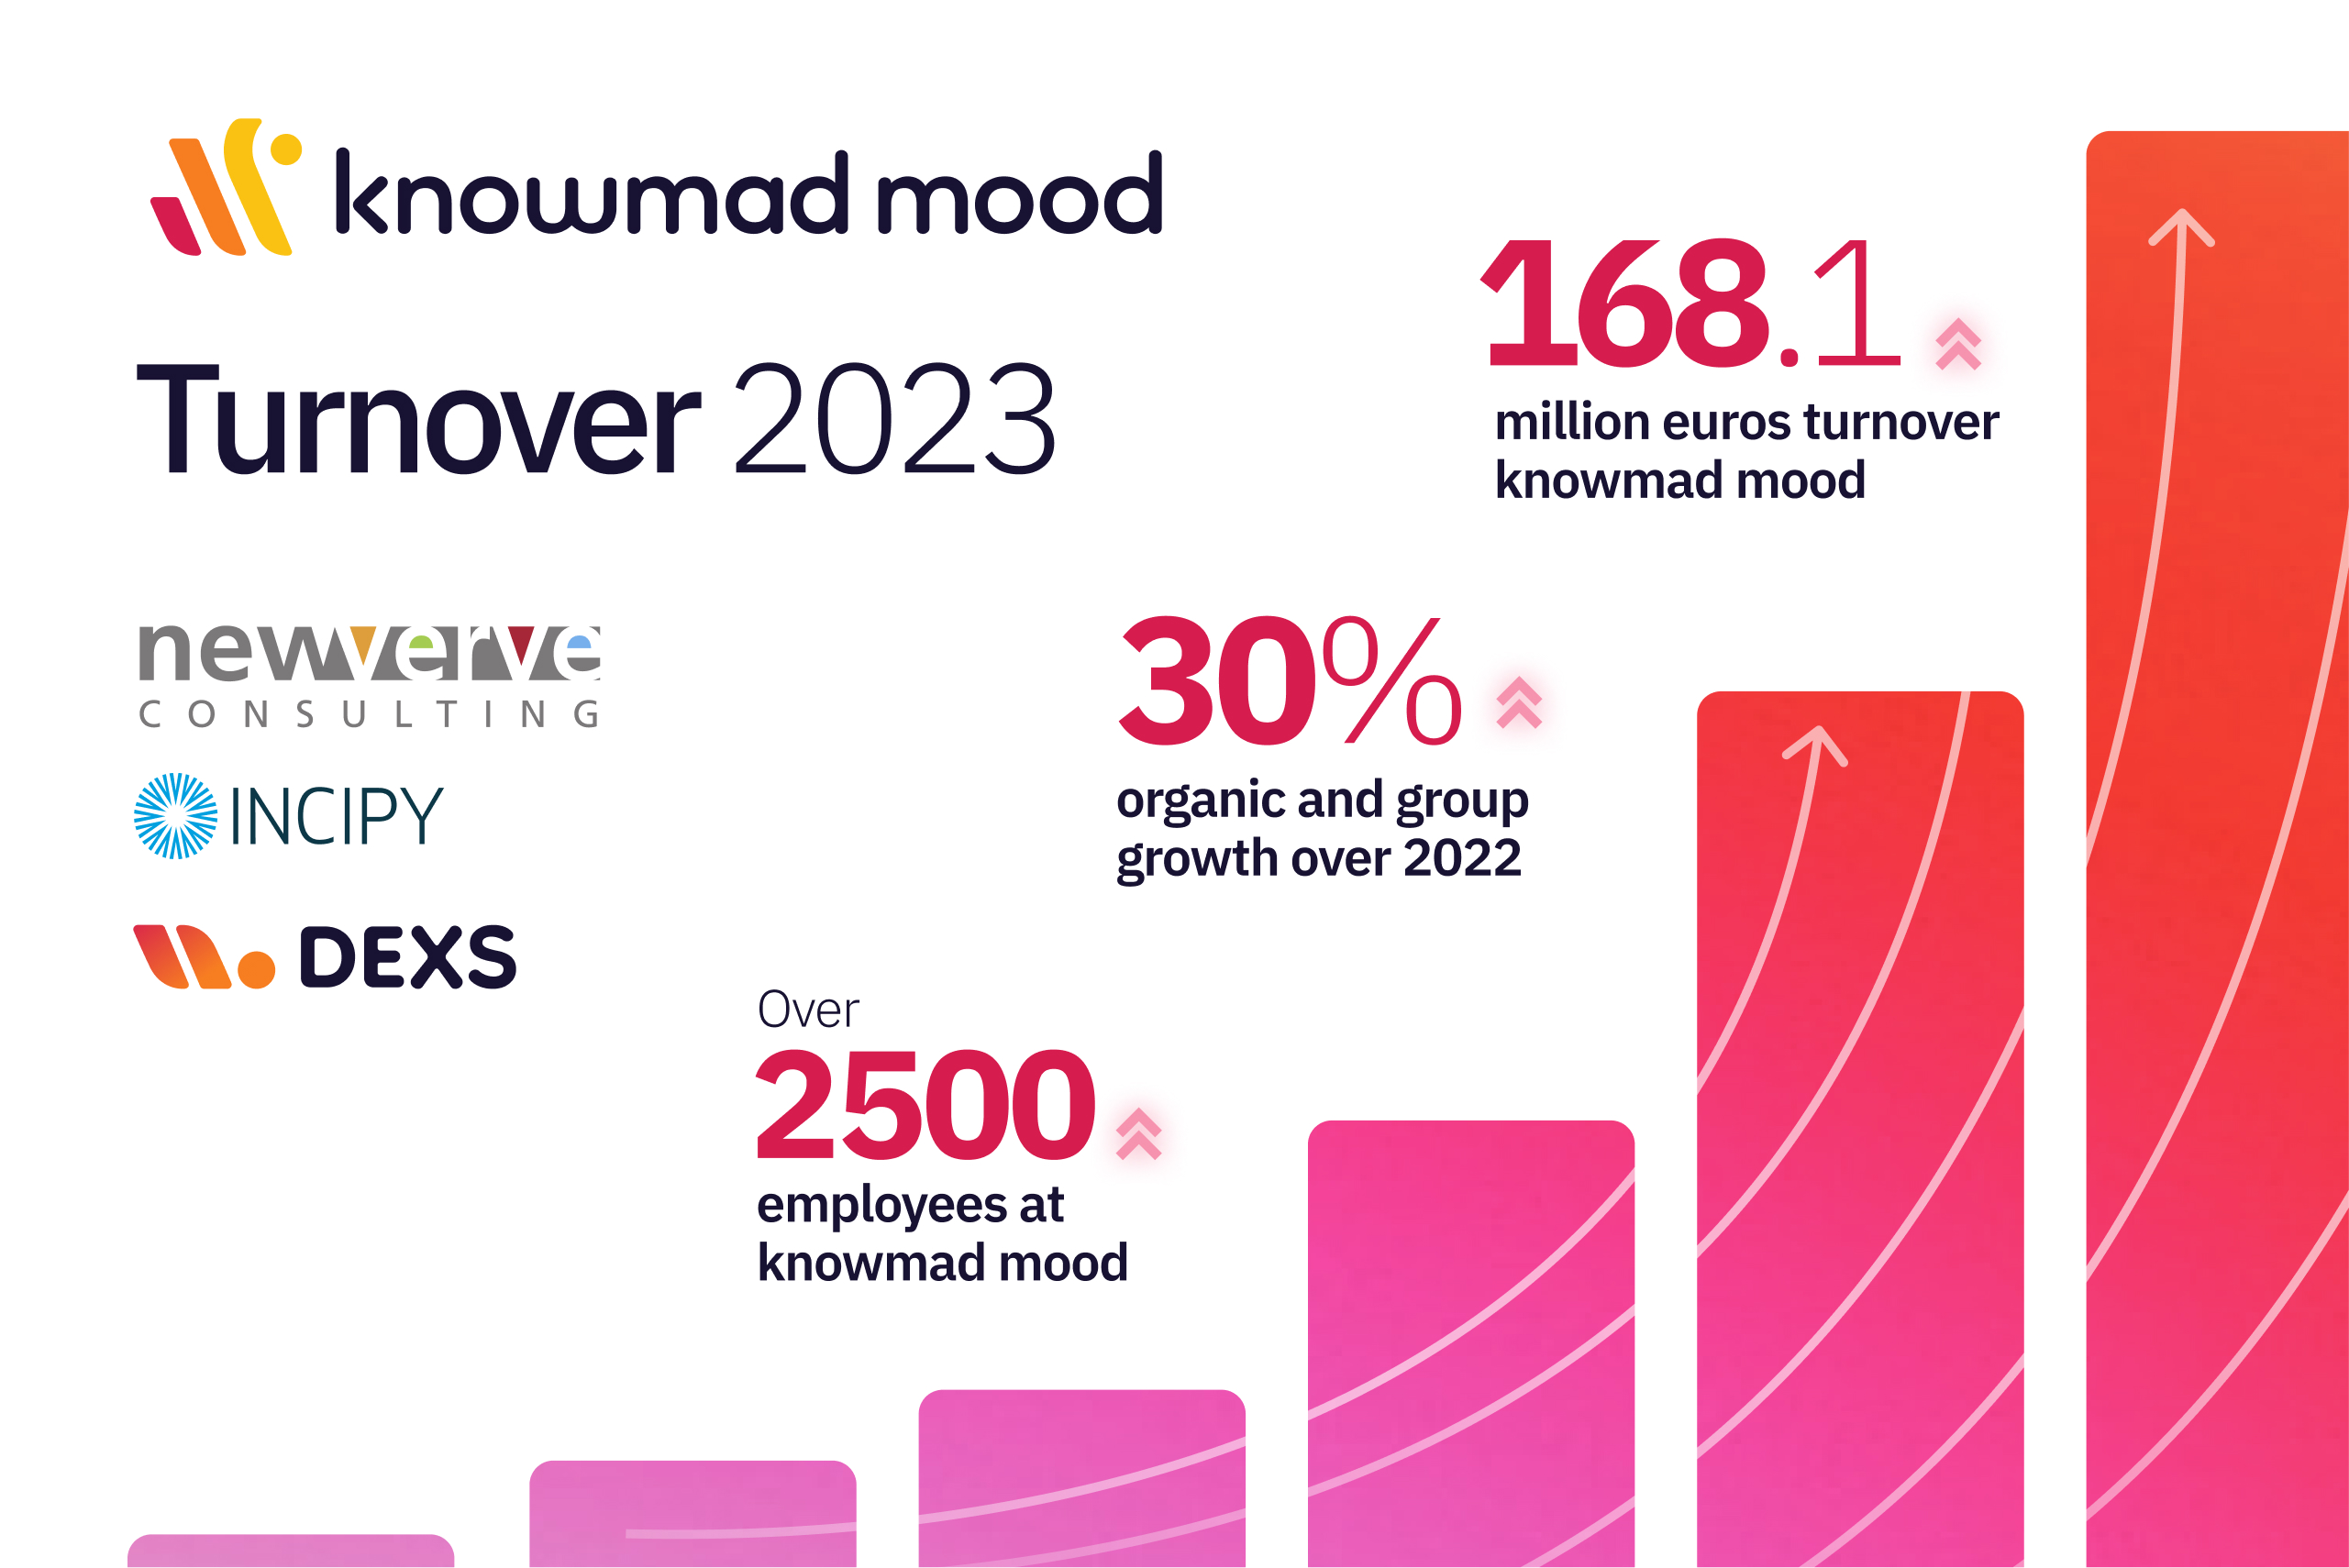 knowmad mood closes 2023